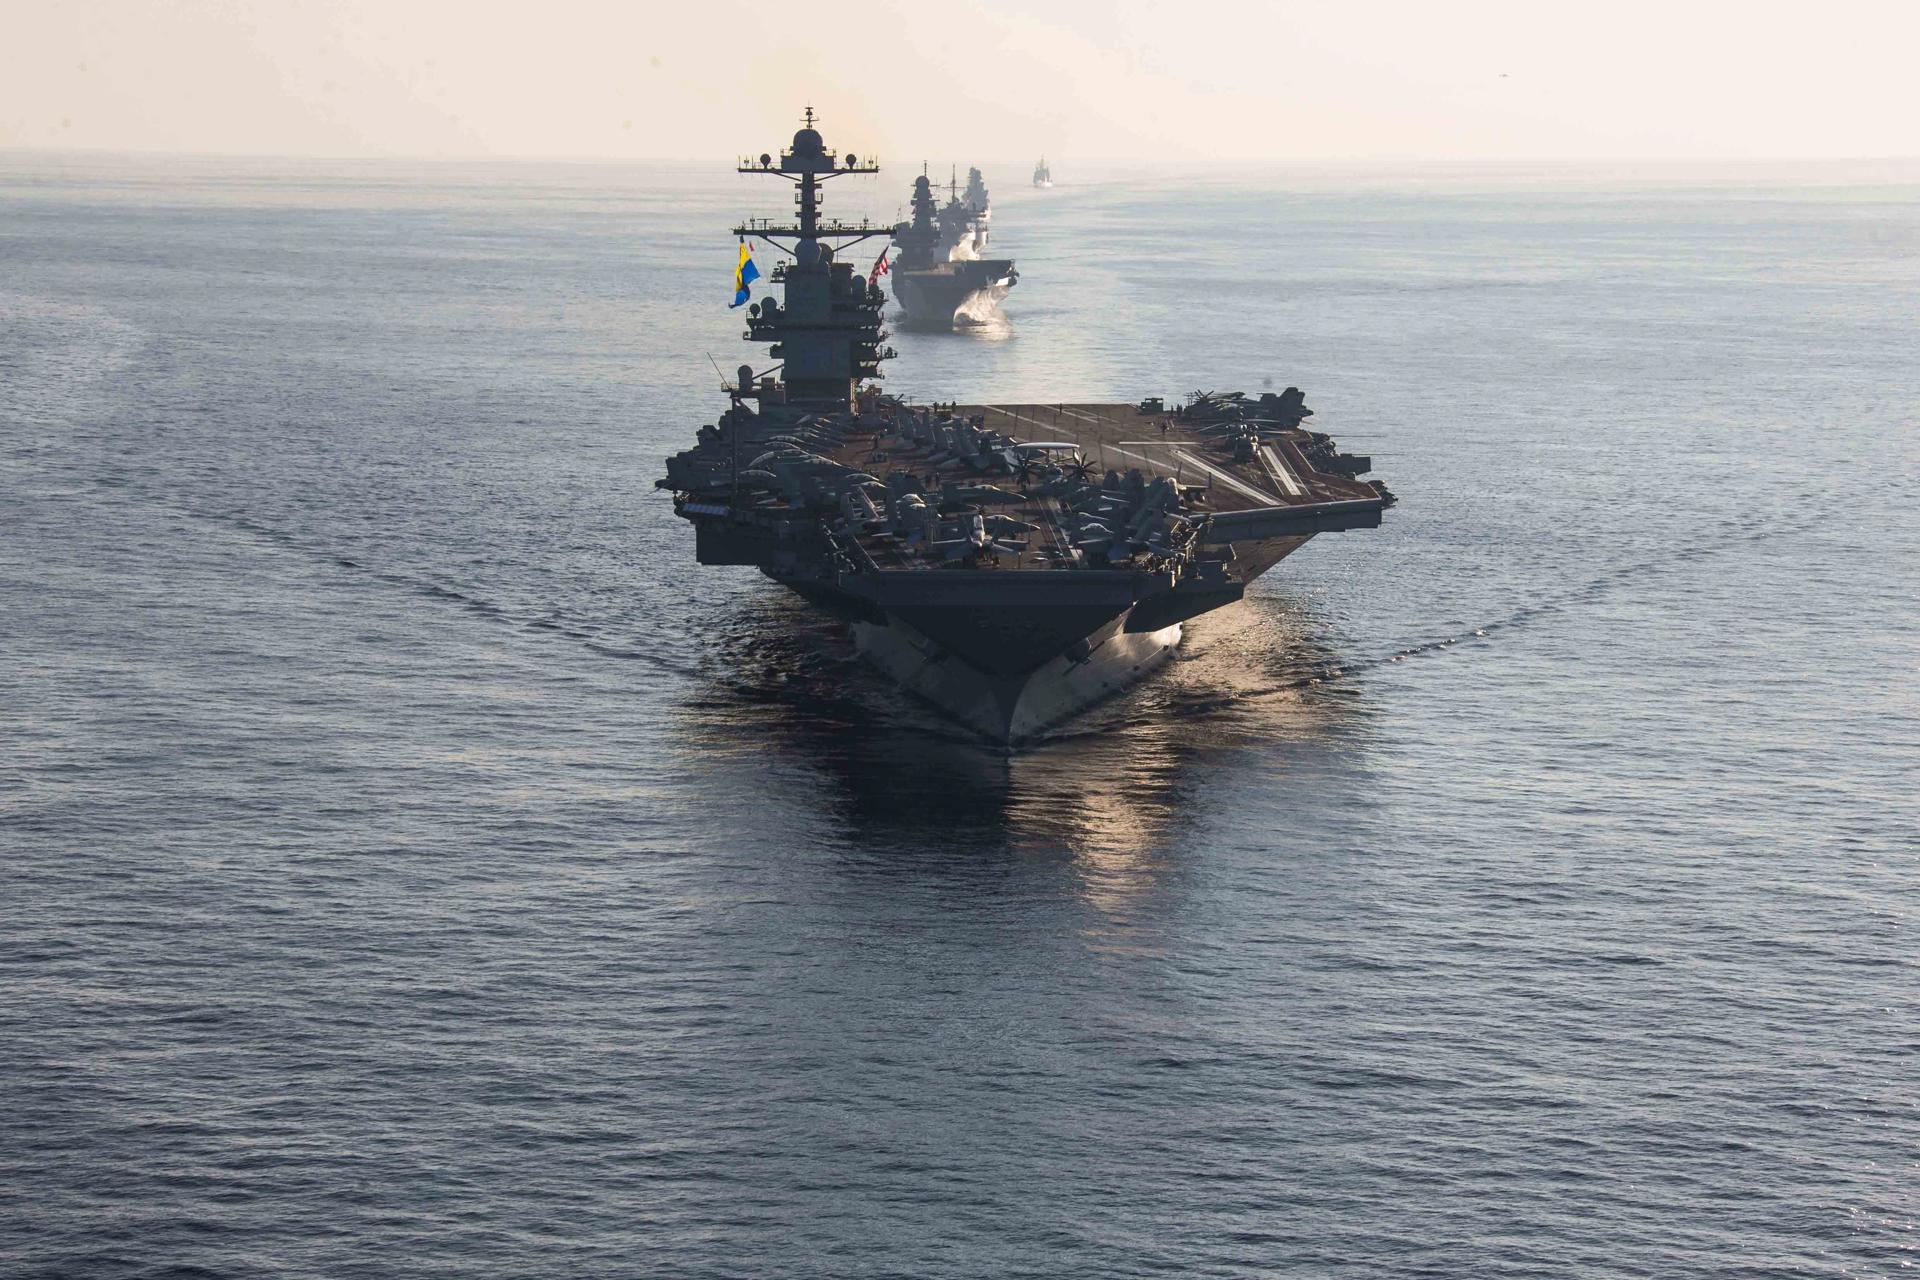 A handout file photo made available by the US Navy shows the aircraft carrier USS Gerald R. Ford (CVN 78) in the Ionian Sea, part of the Mediterranean Sea, 04 October 2023 (issued 09 October 2023). EFE-EPA FILE/US NAVY/MC2 JACOB MATTINGLY HANDOUT HANDOUT EDITORIAL USE ONLY/NO SALES